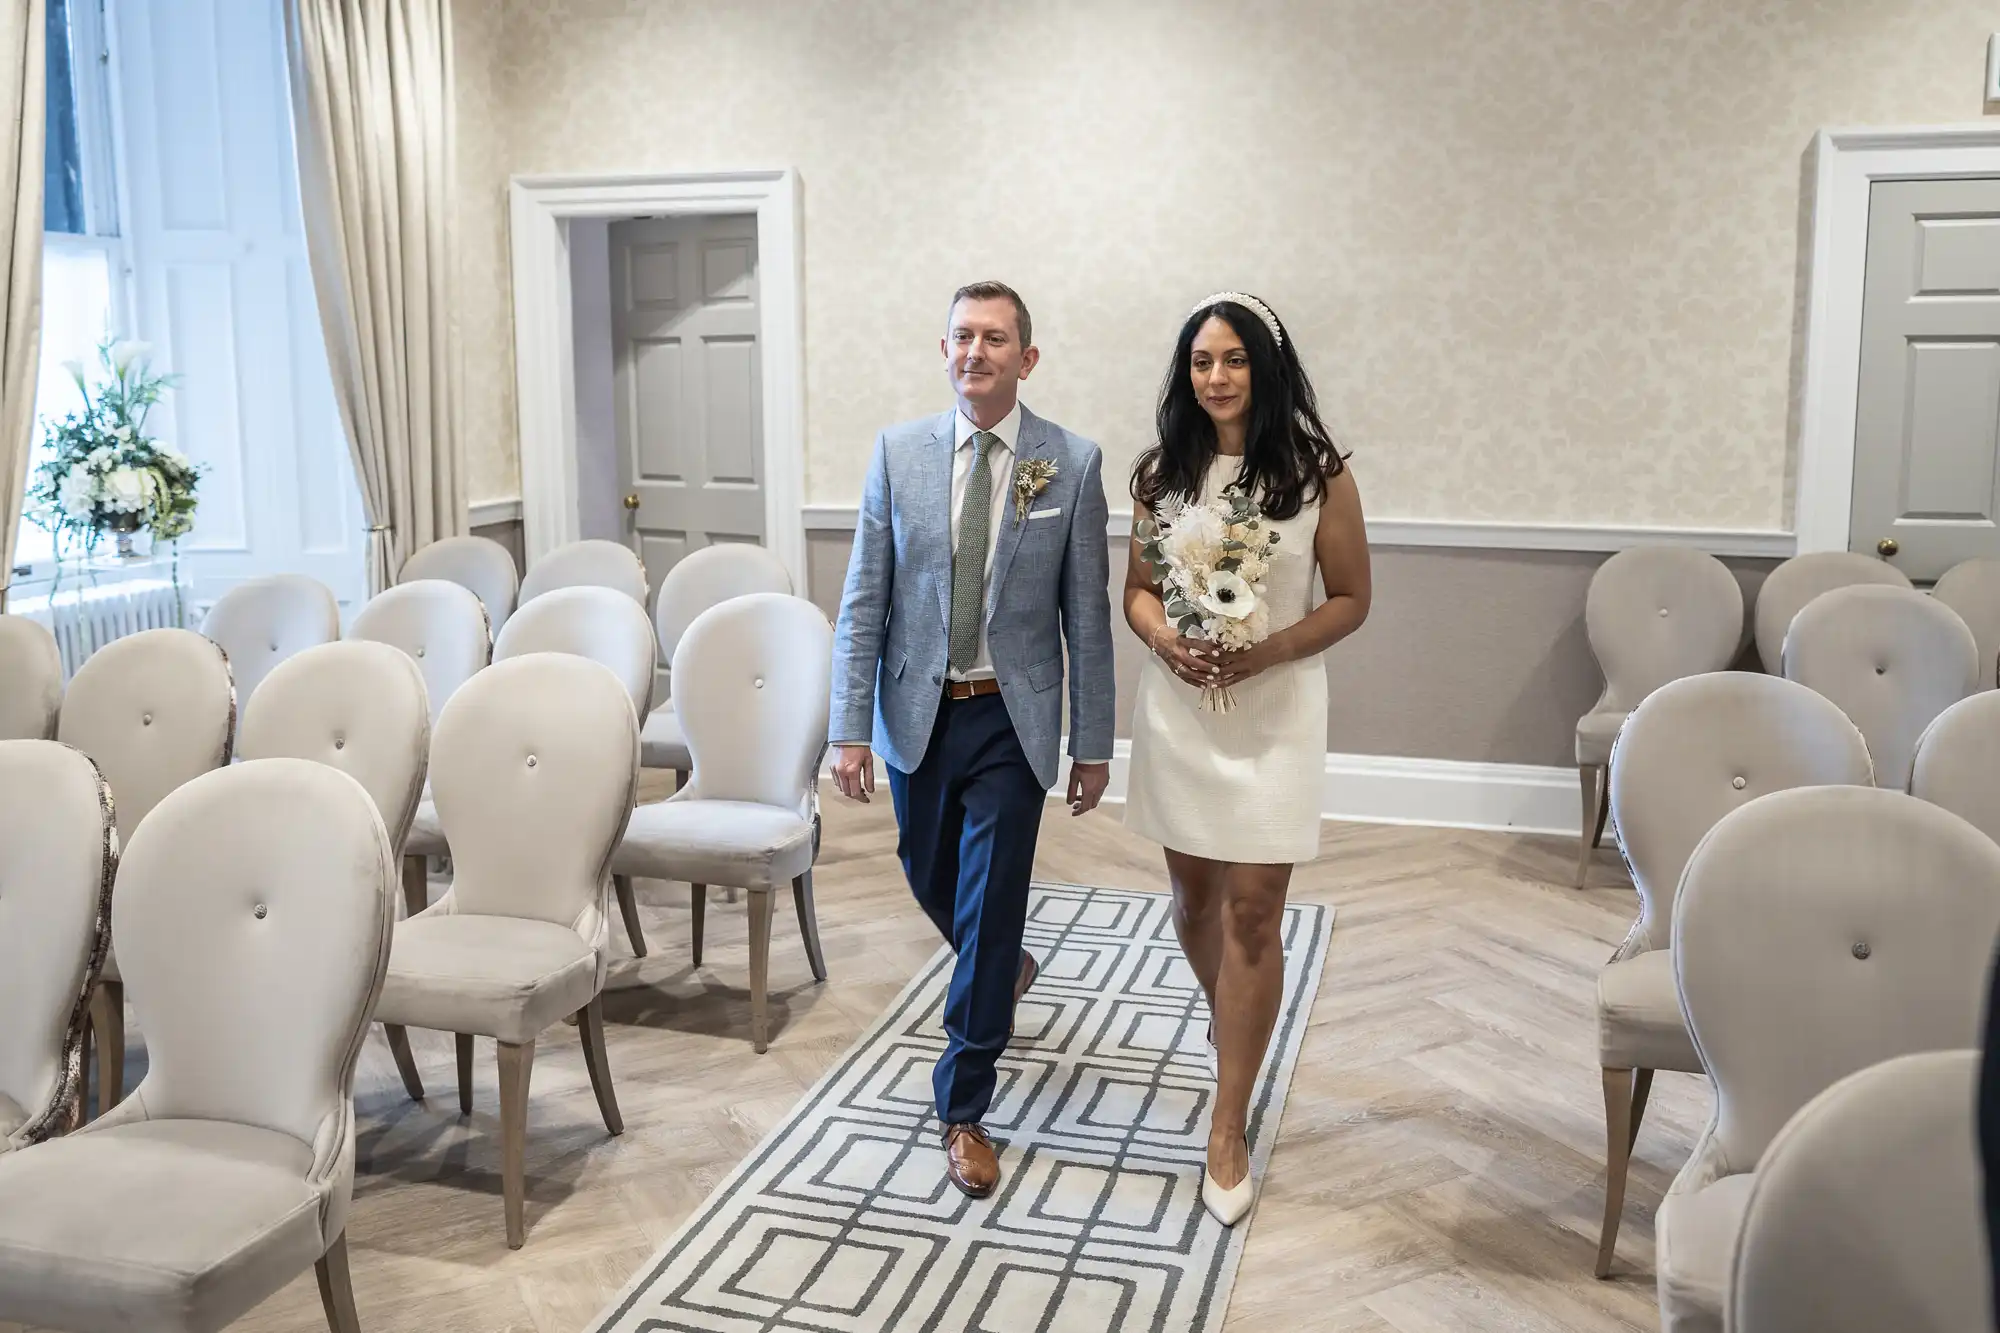 A couple walks down the aisle in a small, elegantly decorated room with beige chairs and light walls. The woman holds a bouquet and the man wears a gray jacket with a blue tie.